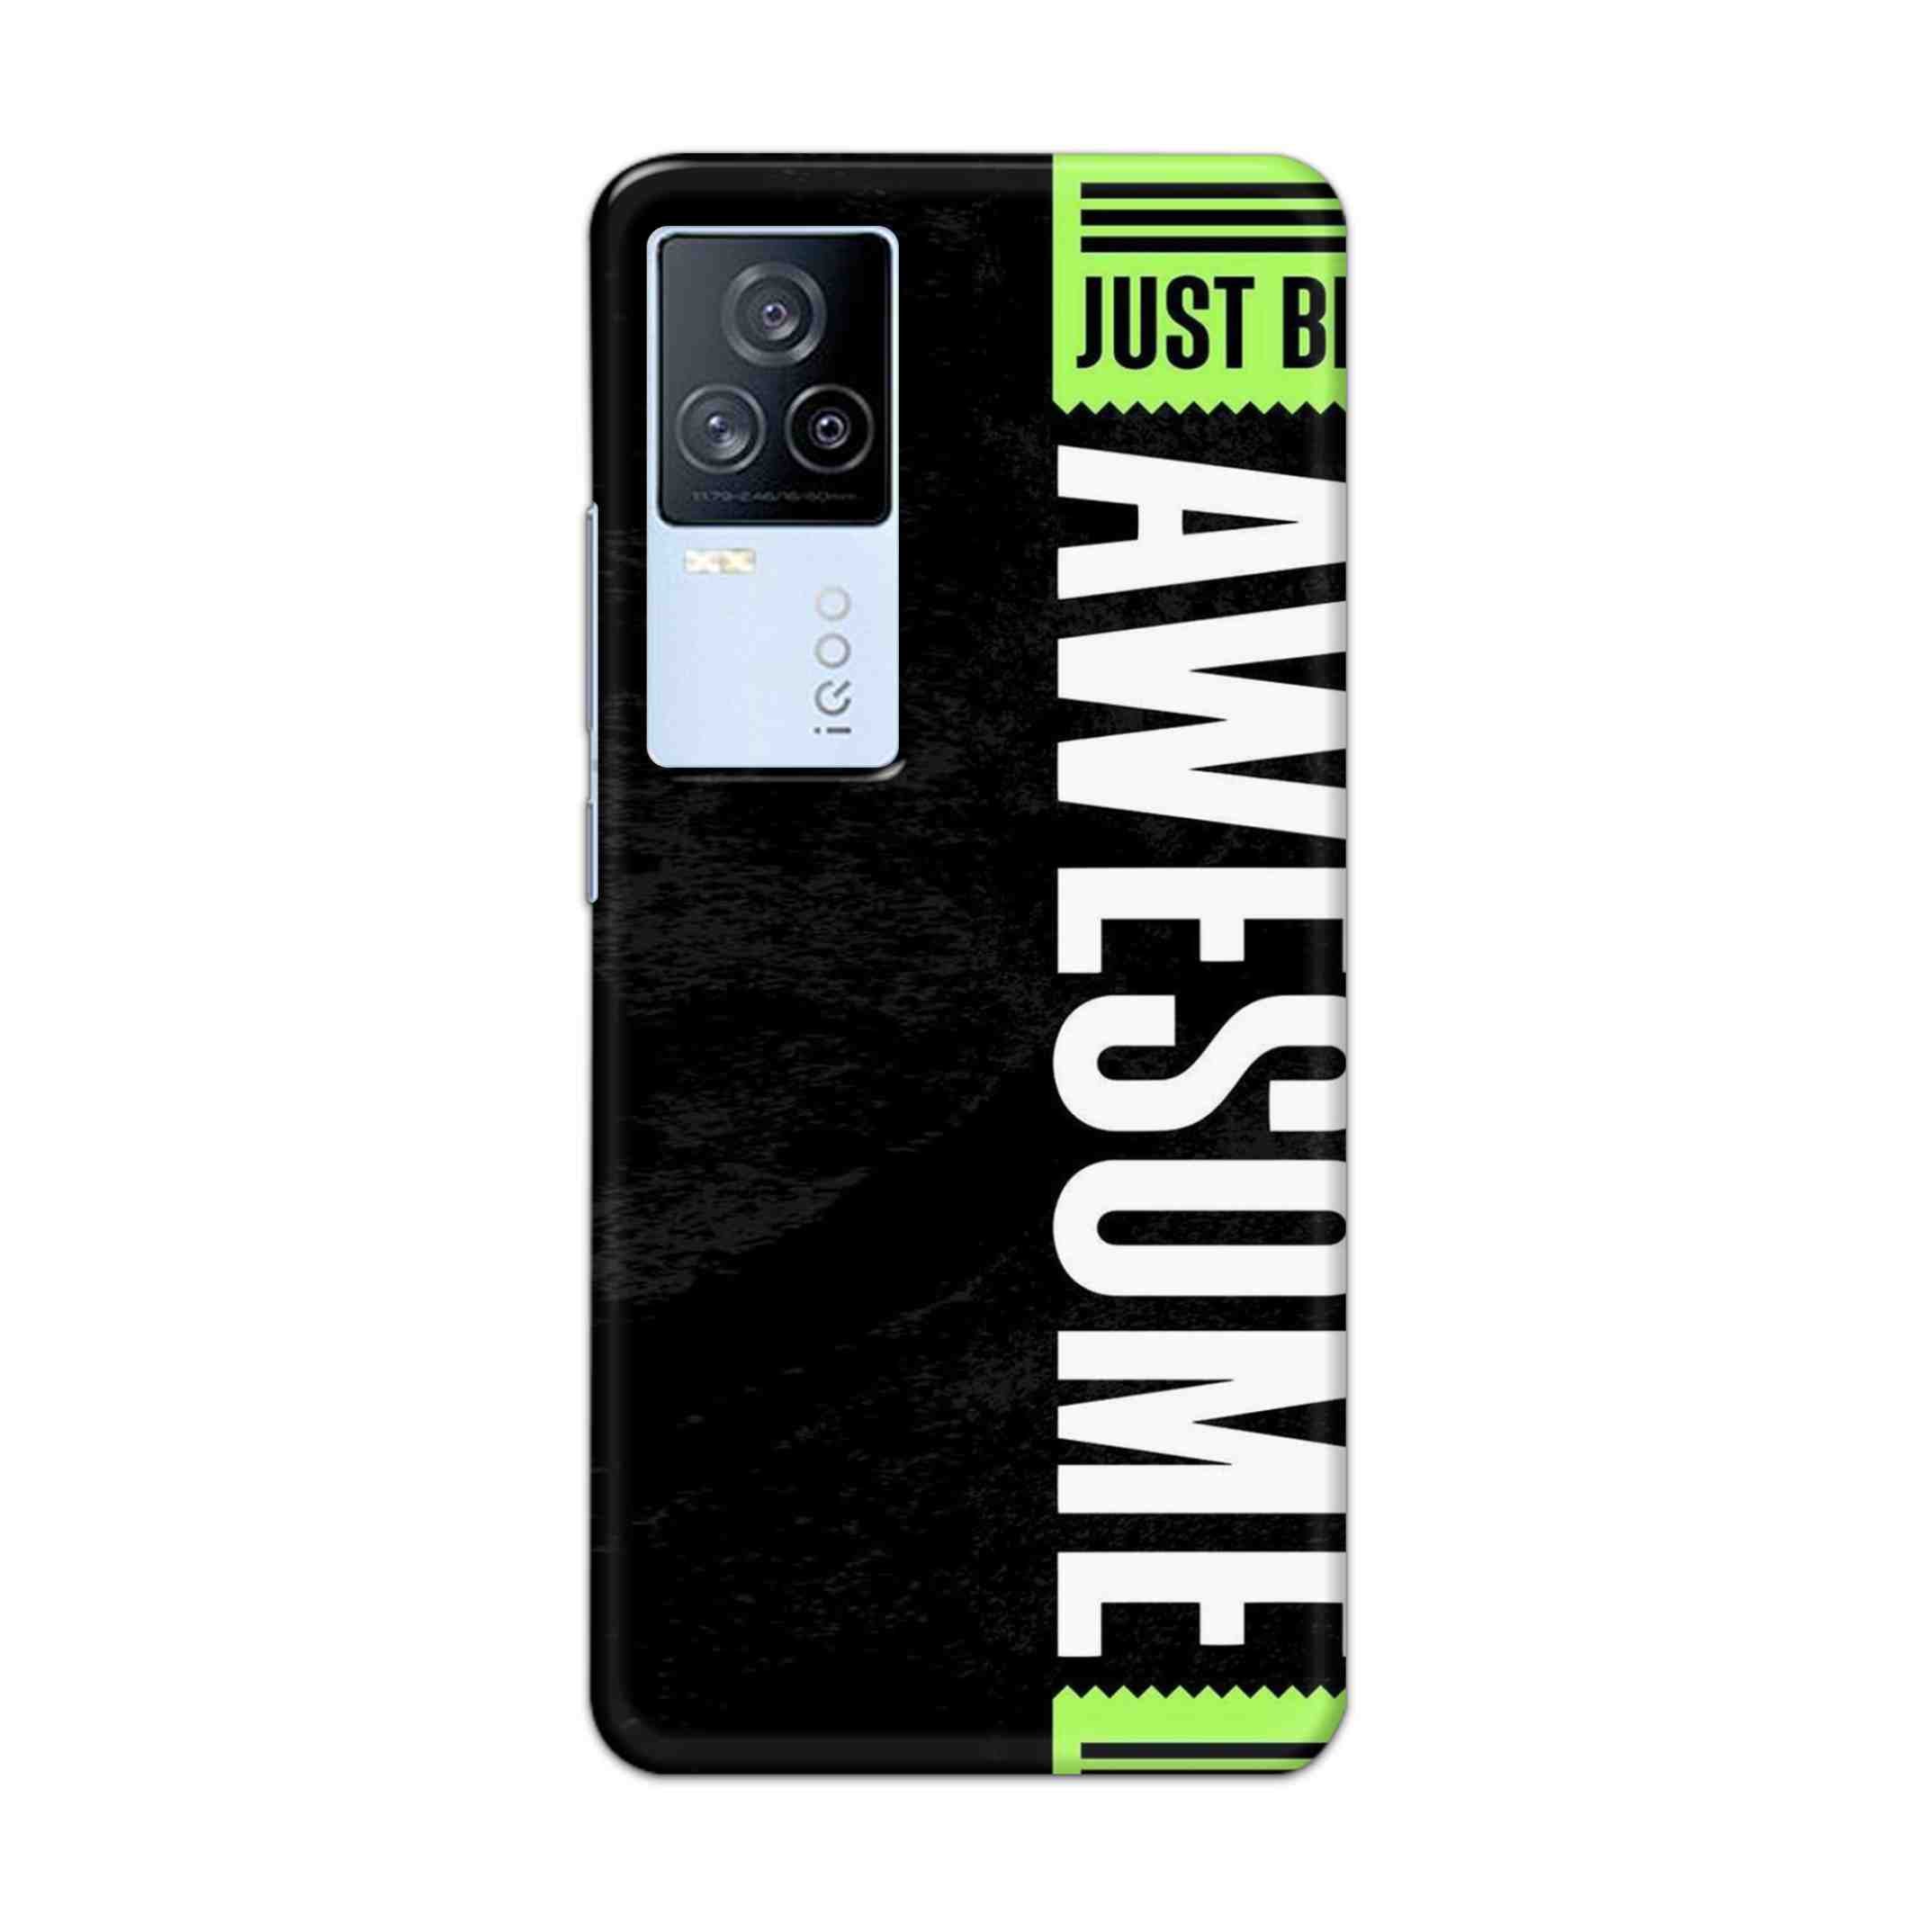 Buy Awesome Street Hard Back Mobile Phone Case/Cover For iQOO7 Online